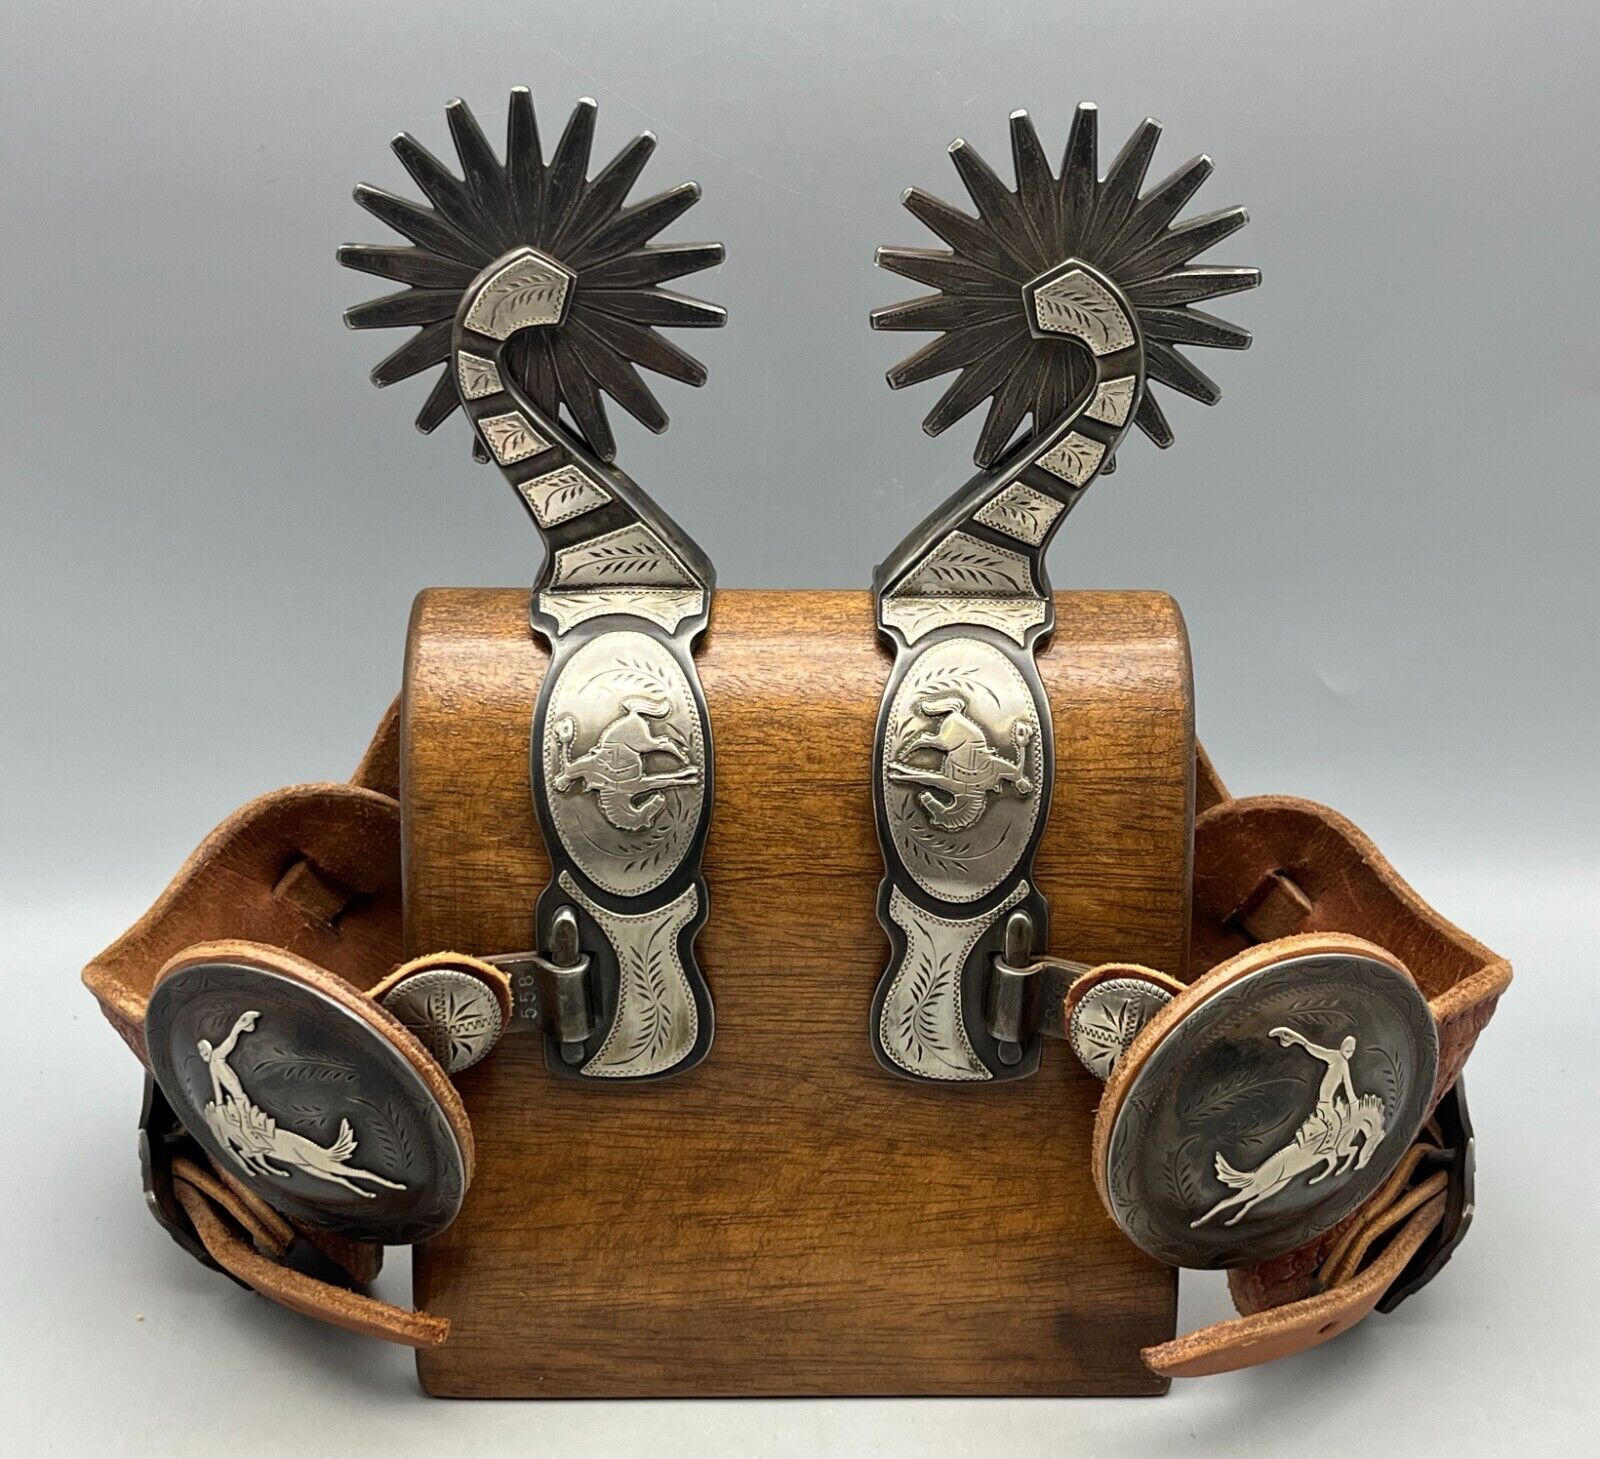 Superb Pair Of Spurs With Conchos And Buckles By Terry Alward